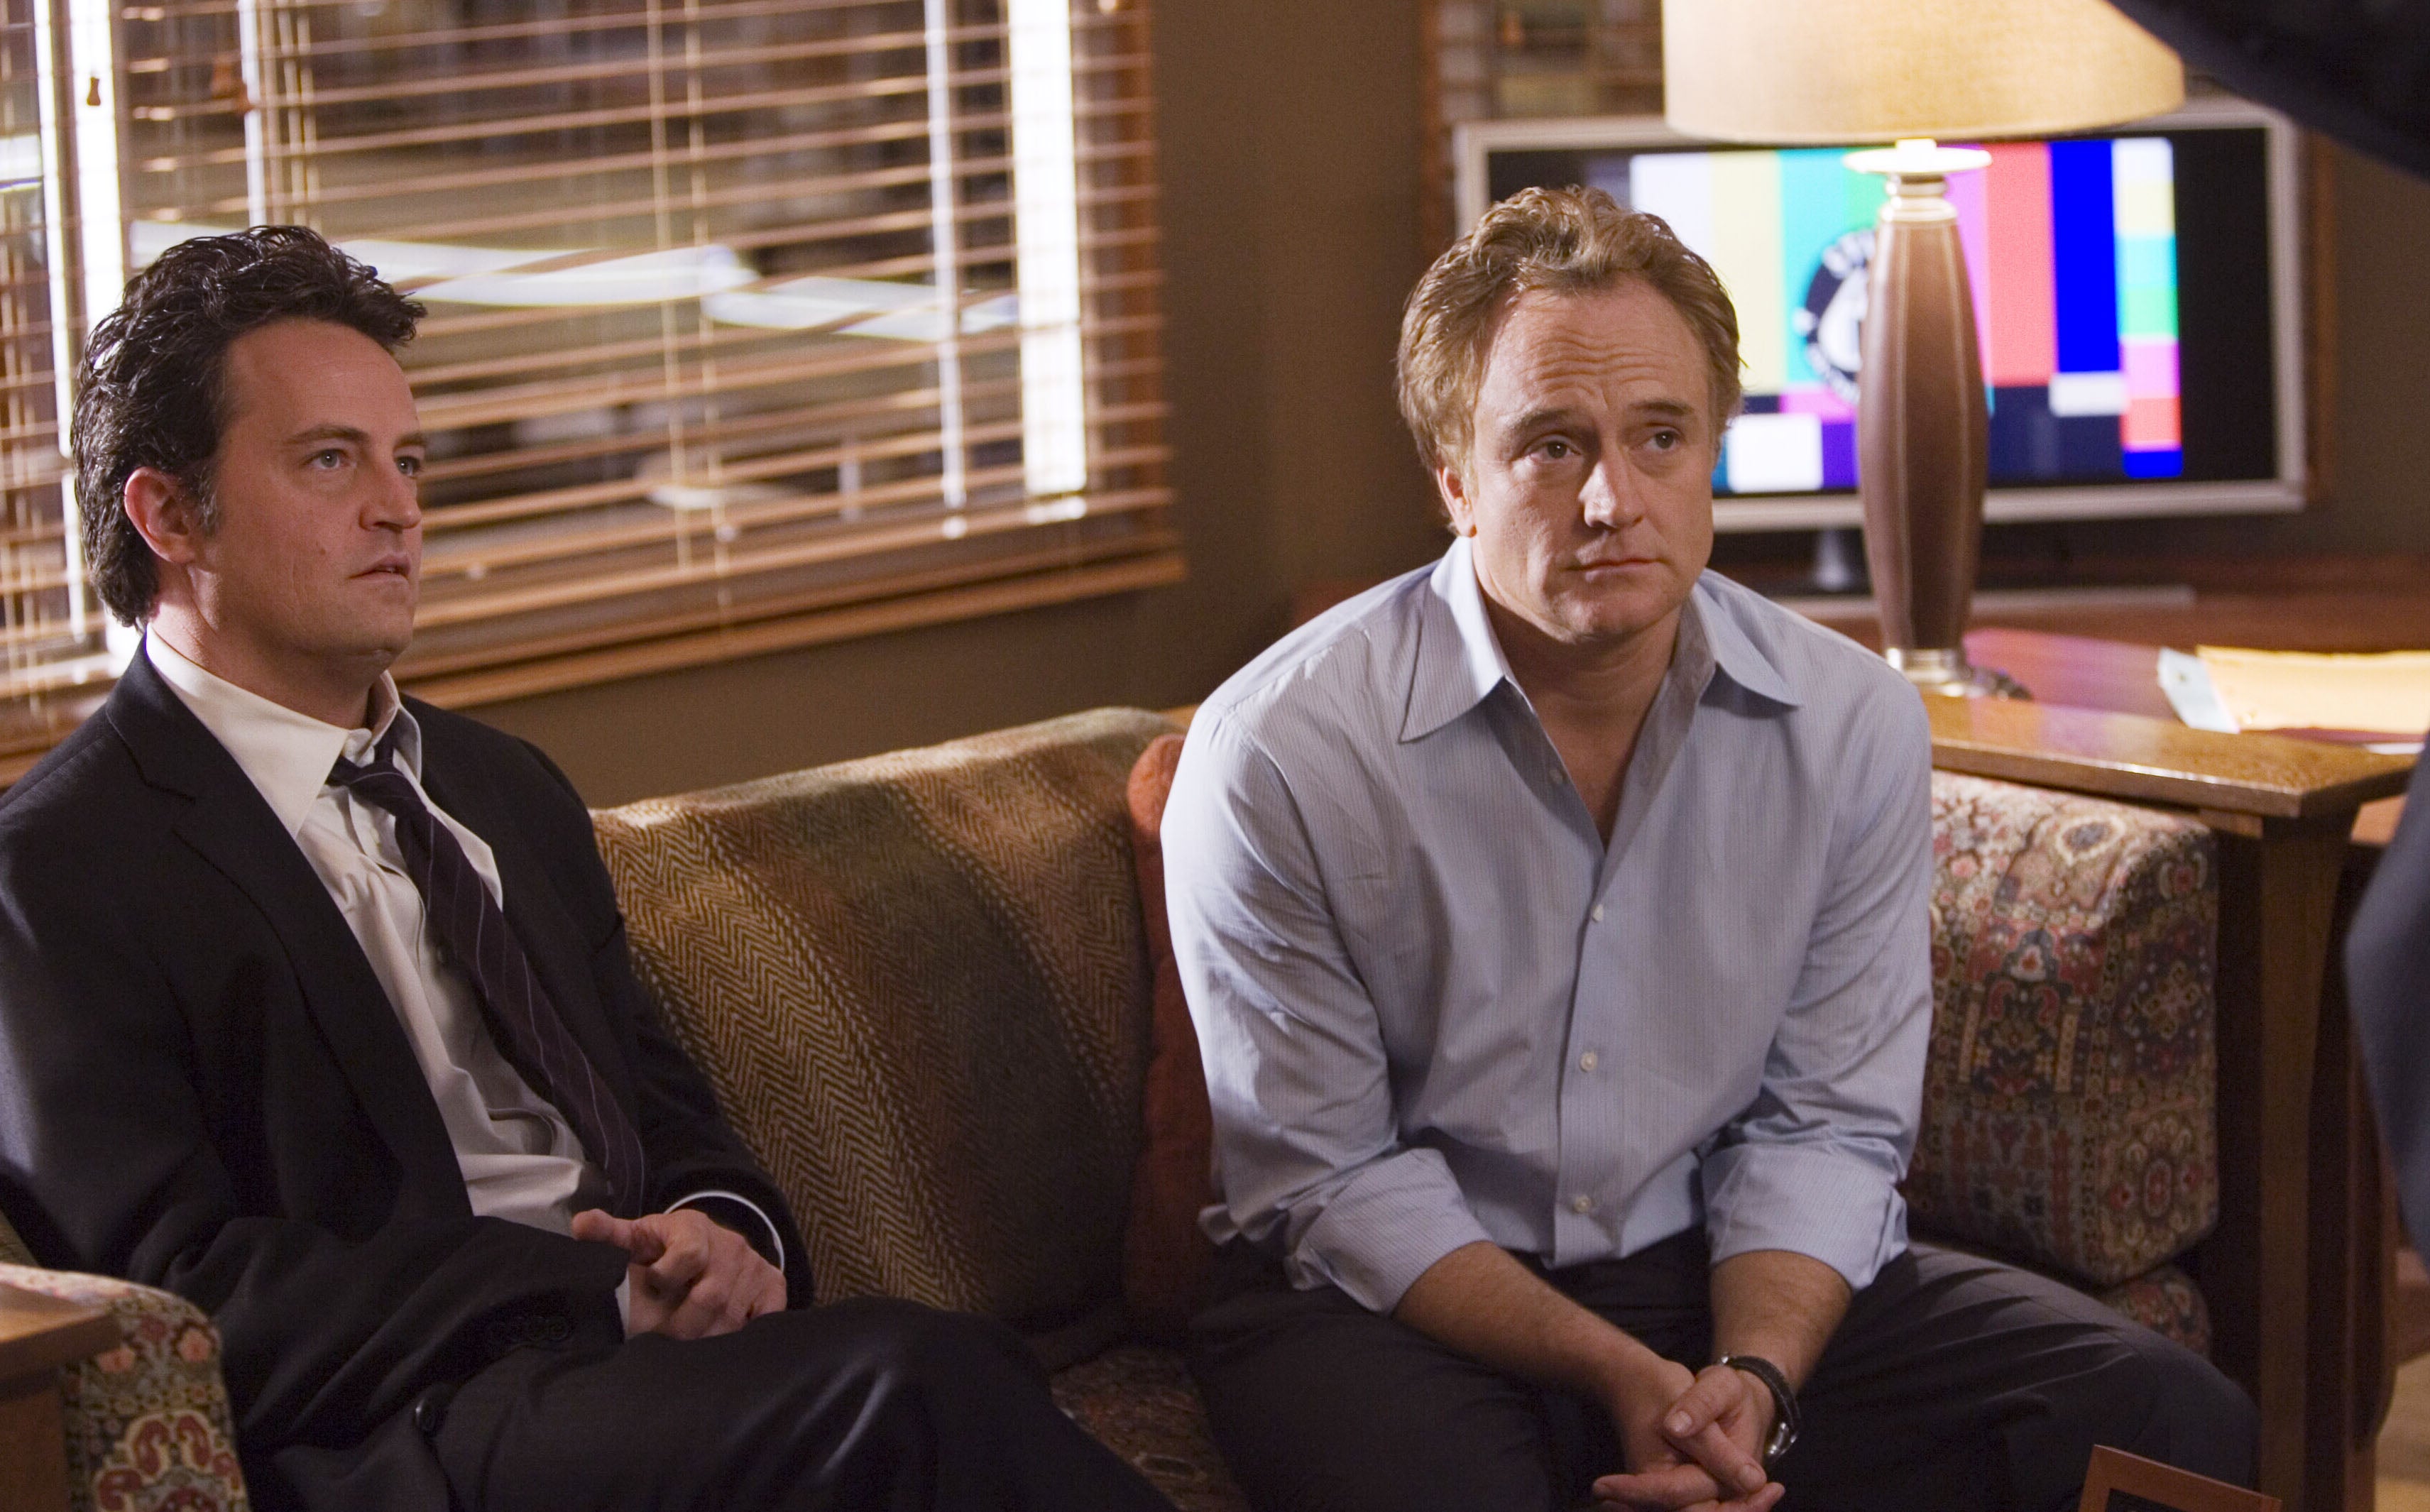 Perry and Bradley Whitford